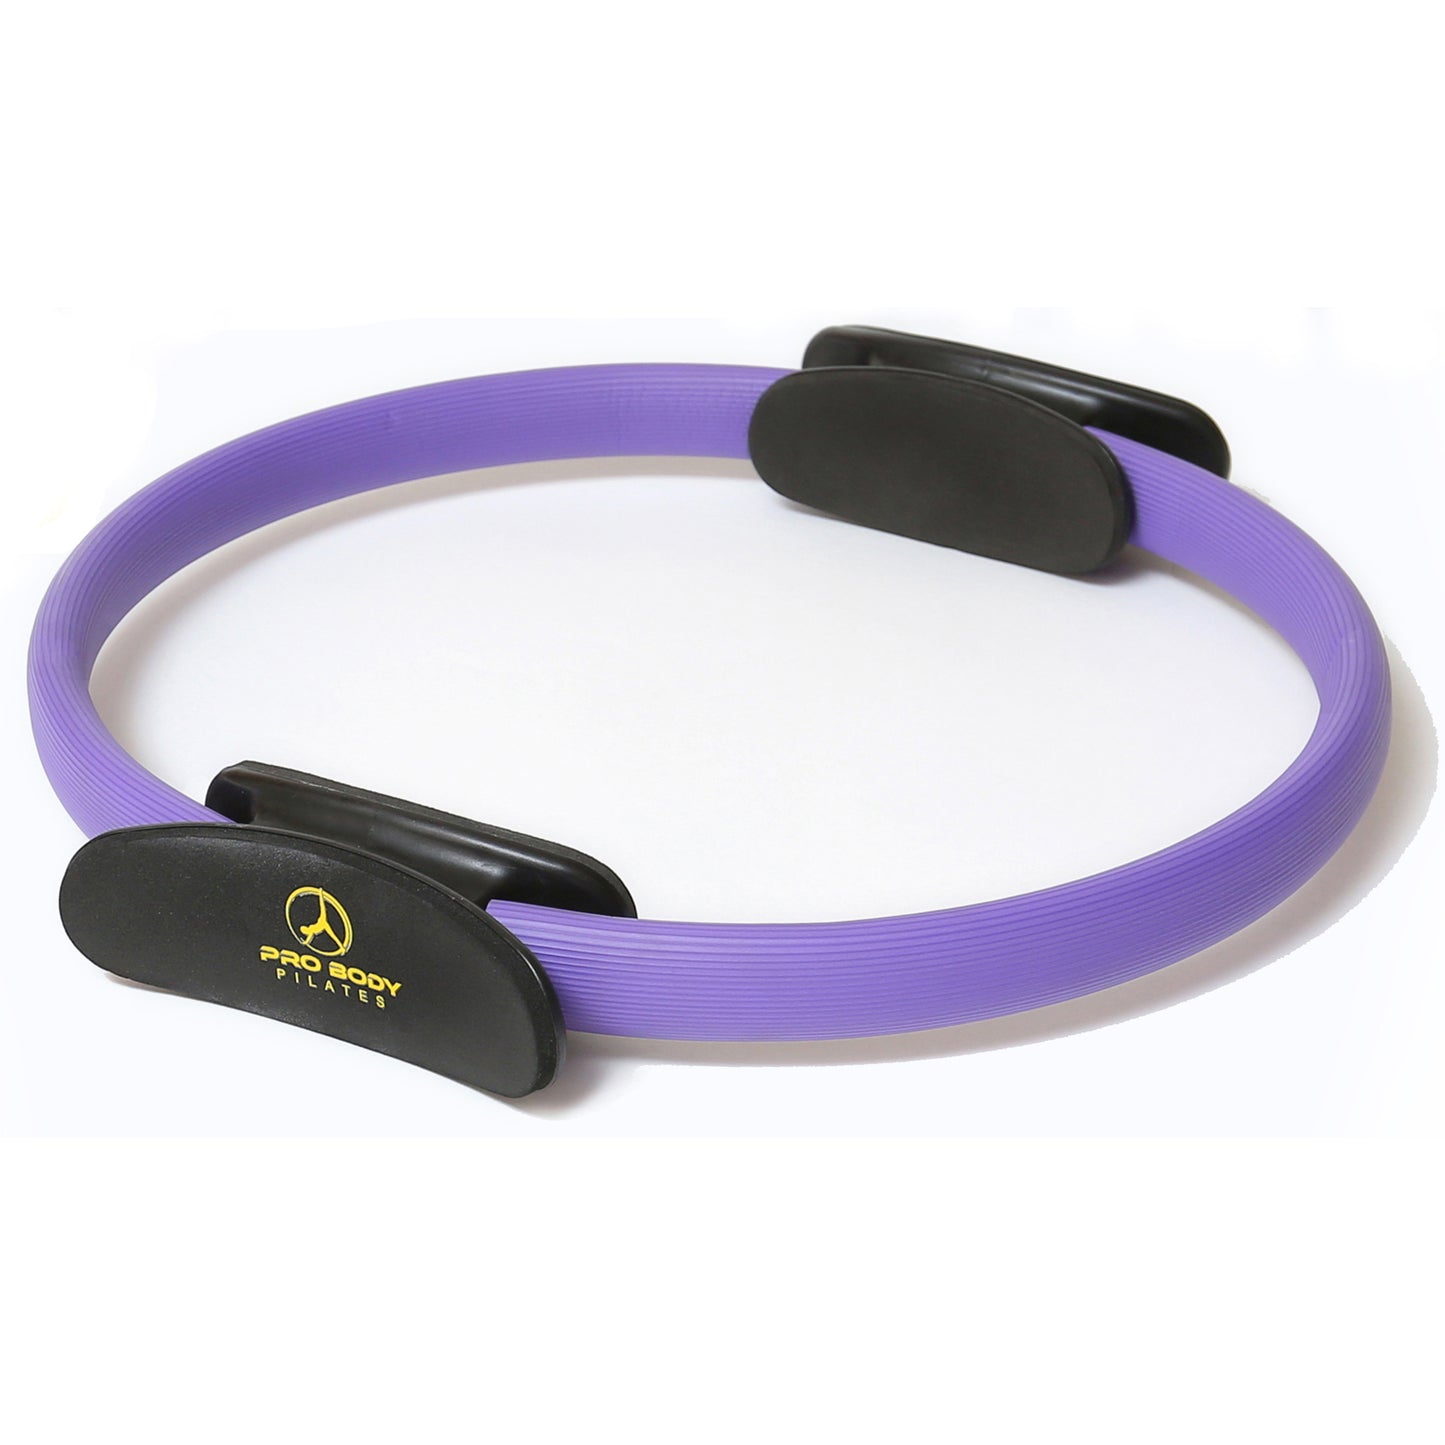 Pilates Ring for Toning Thighs, Abs and Legs